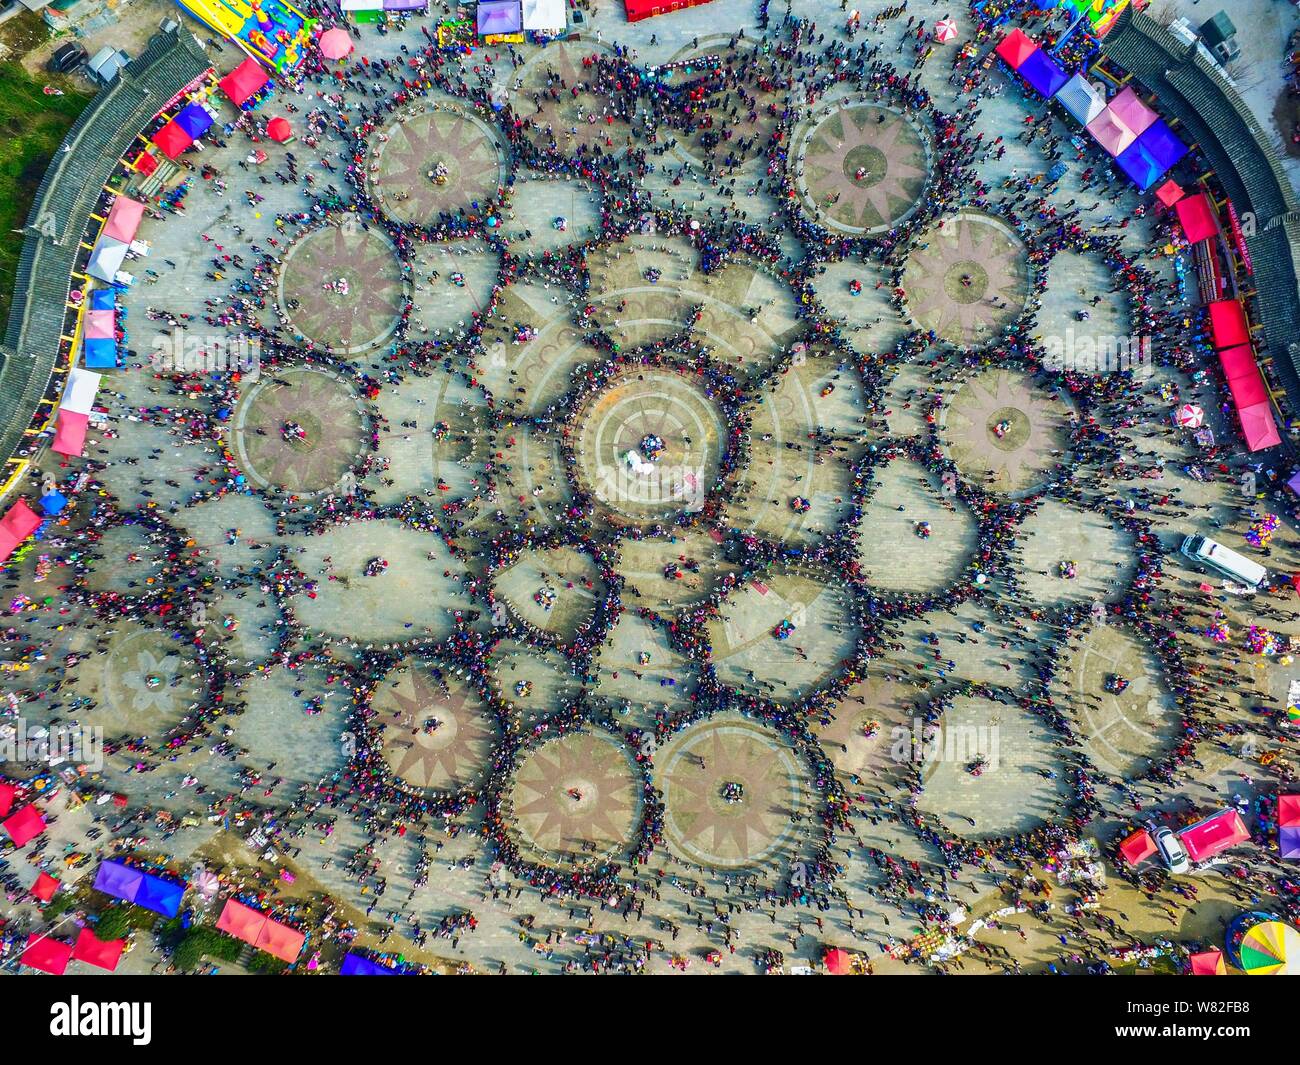 Aerial view of Chinese women of Miao ethnic minority dressed in traditional silver-decorated clothes and headwears performing a group dance in circles Stock Photo